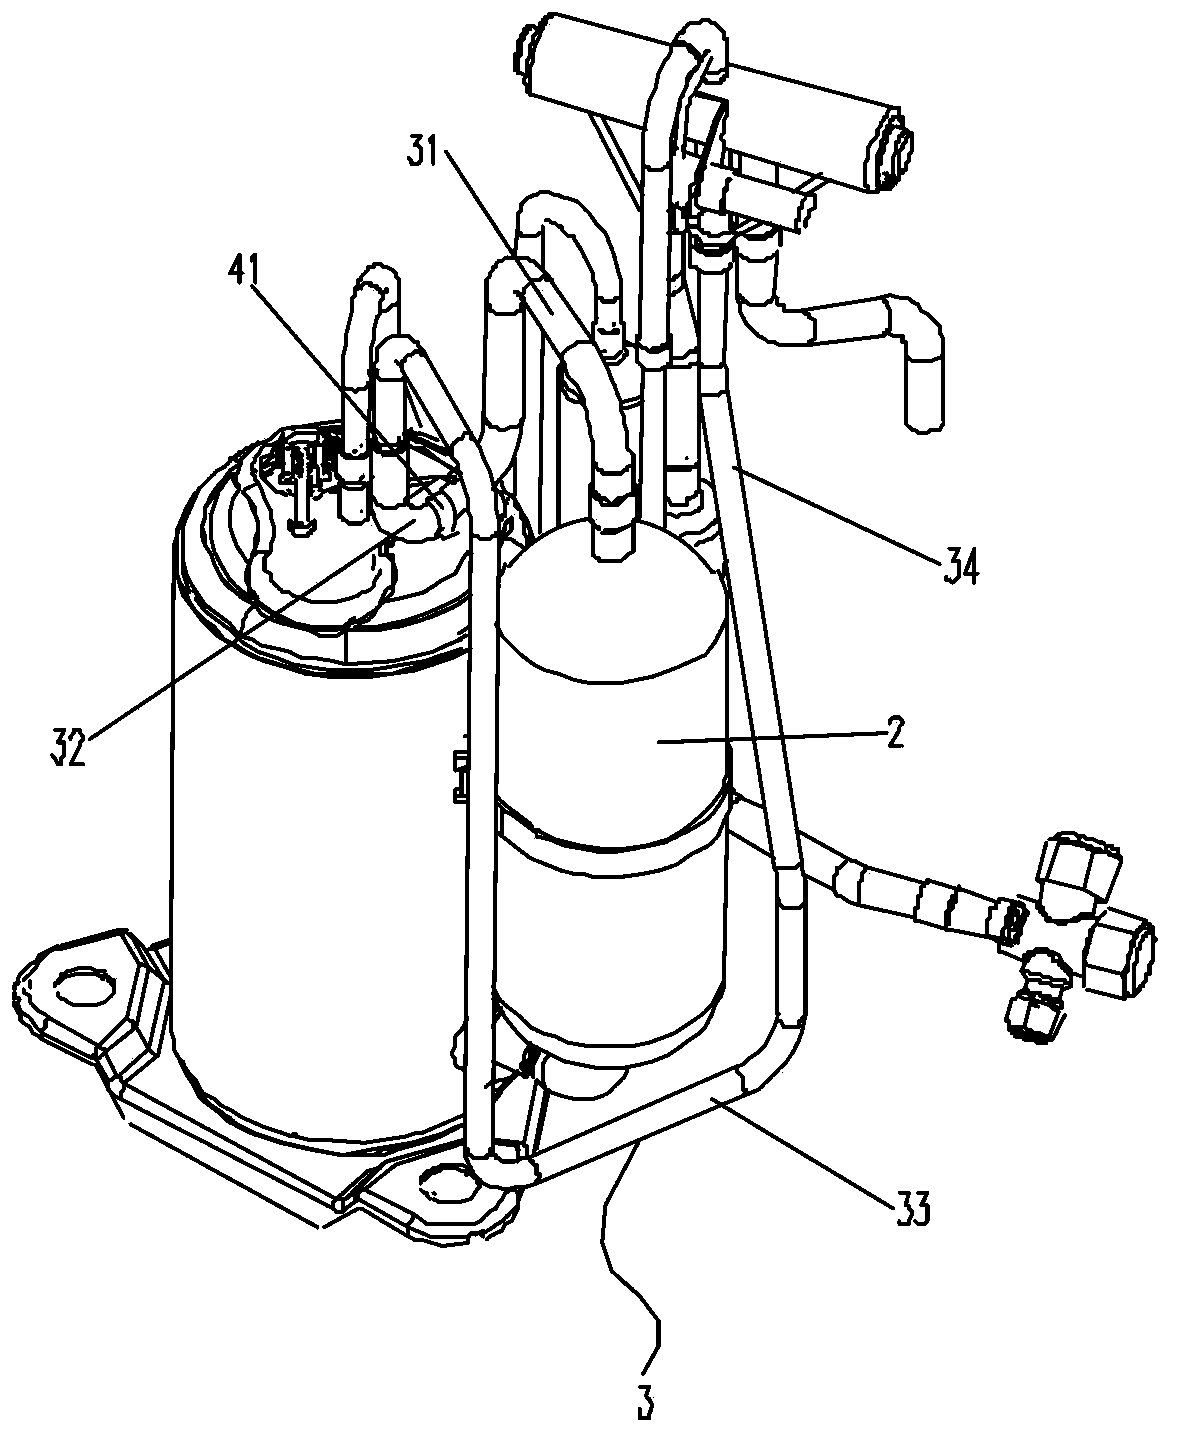 Compressor pipeline assembly and air conditioner